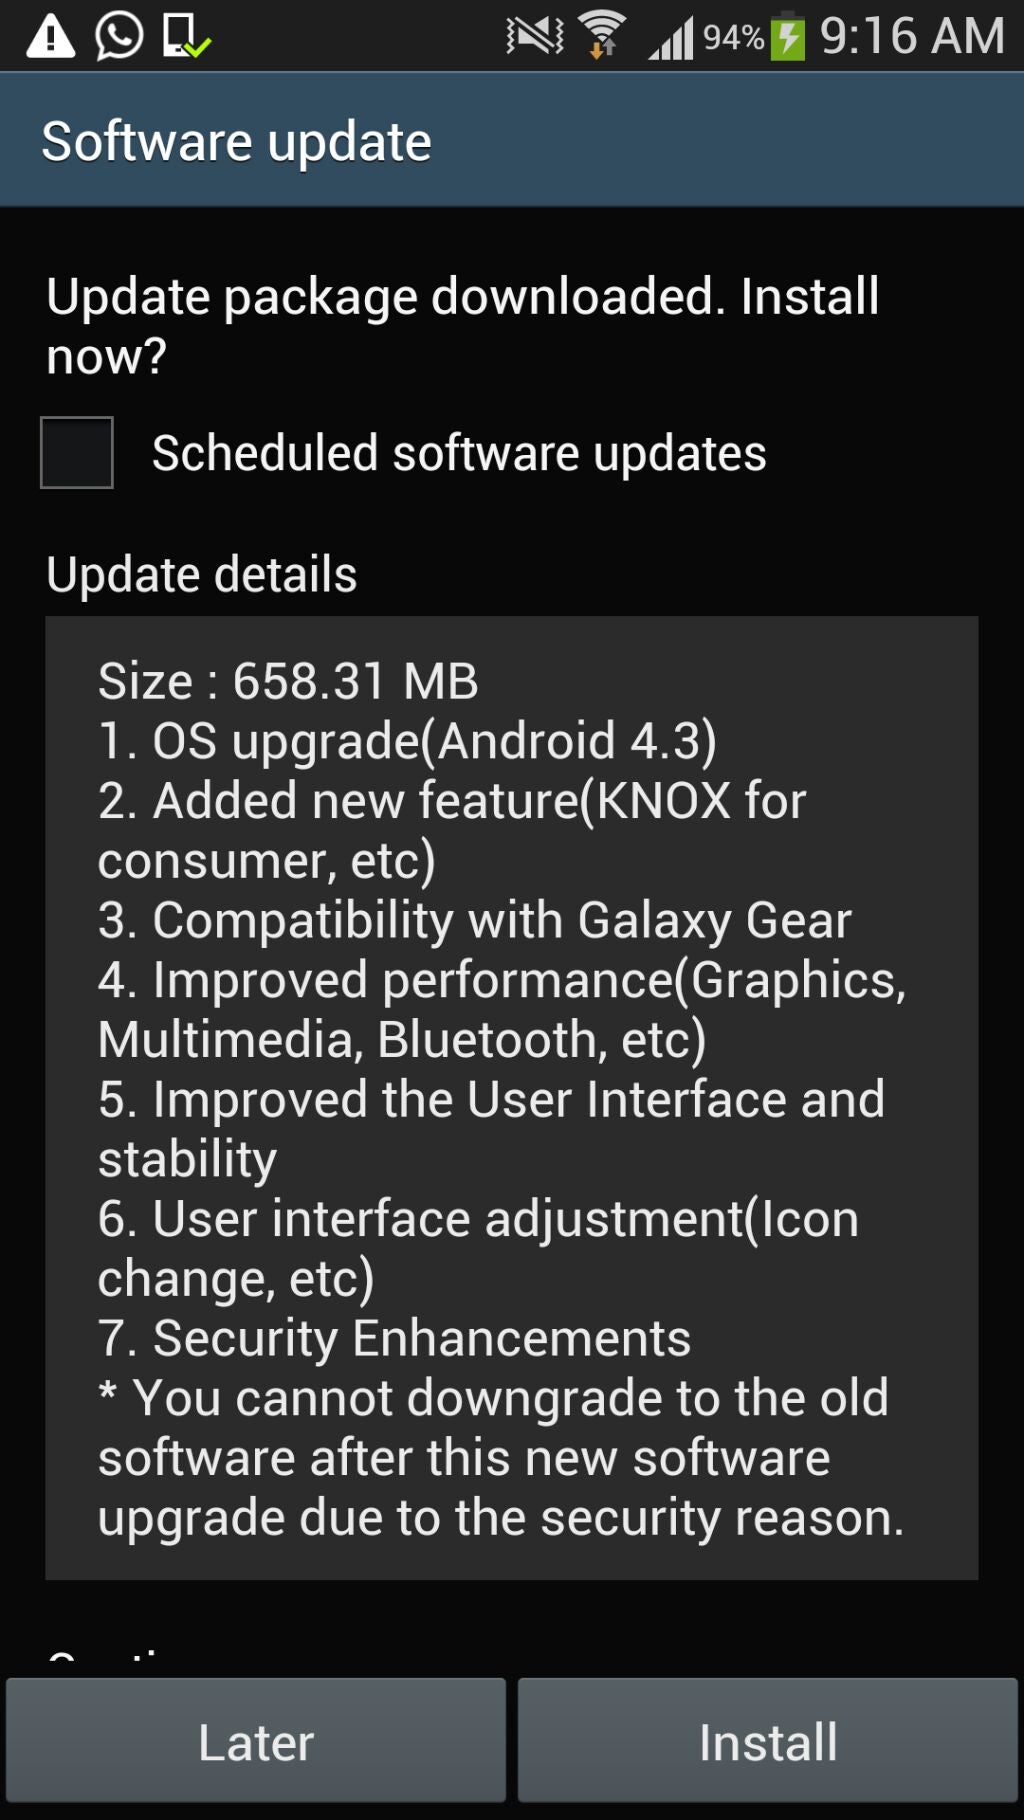 Samsung Galaxy S4 Android 4.3 update starts rolling out officially, just as promised - Exynos version too